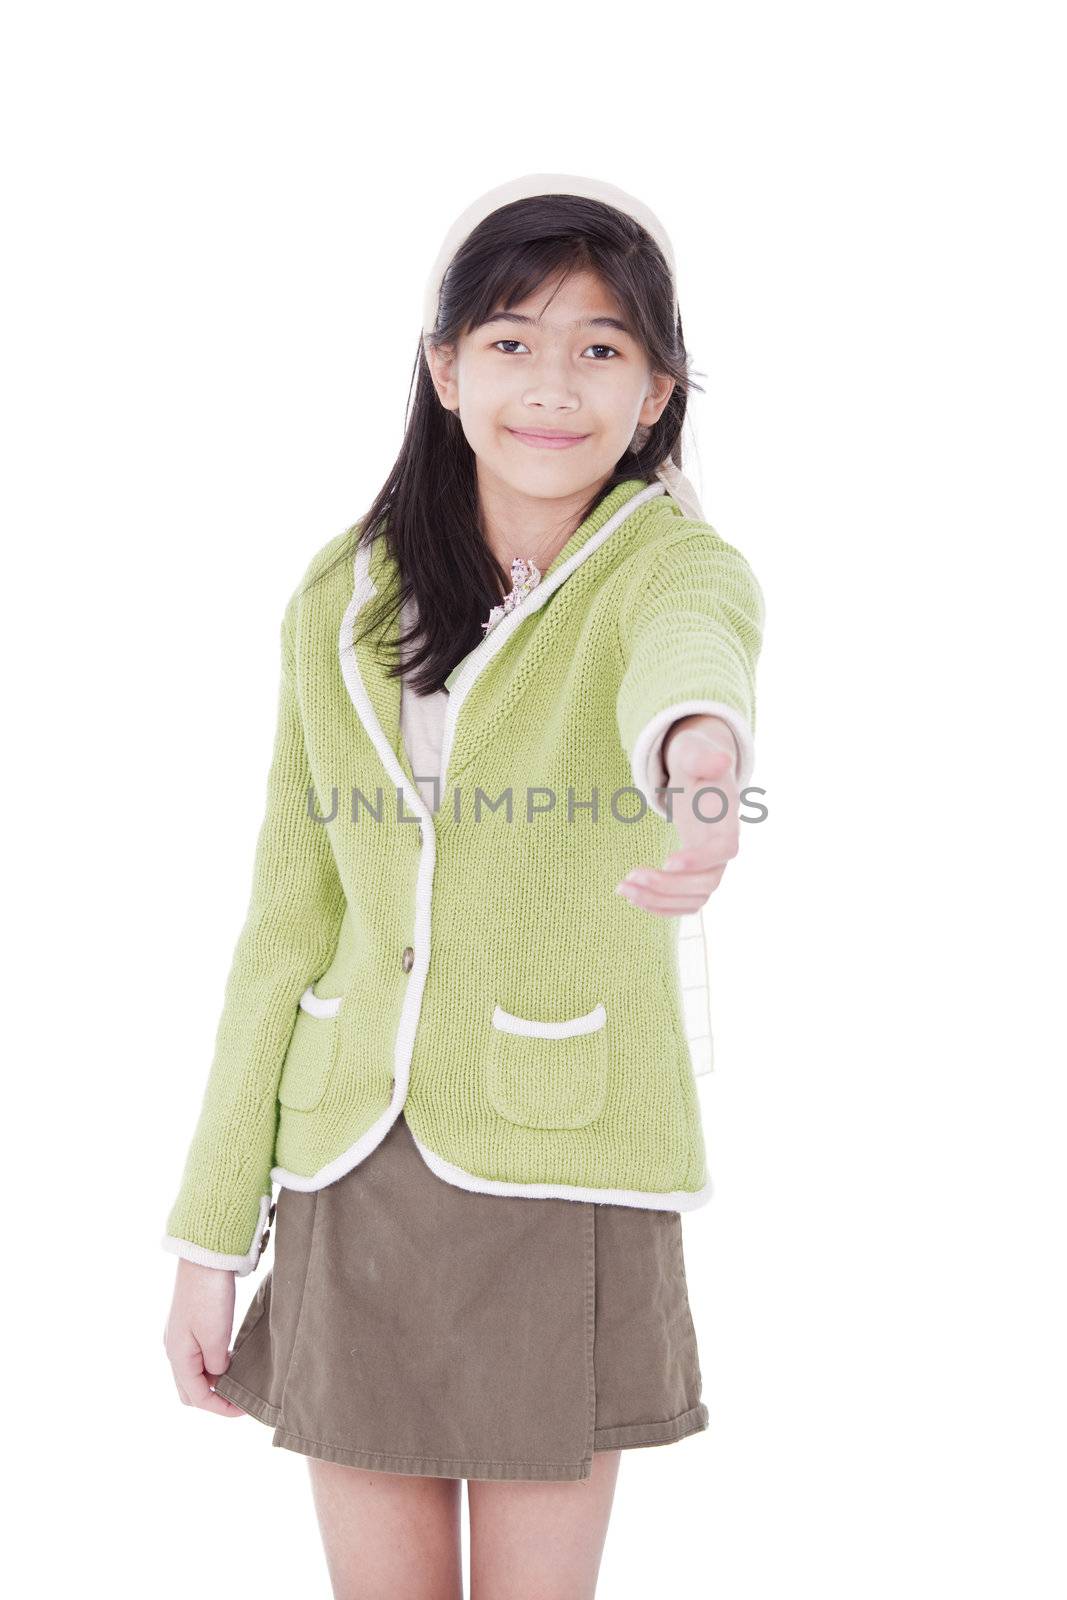 Biracial asian girl in lime green sweater extending hand in greeting for a handshake